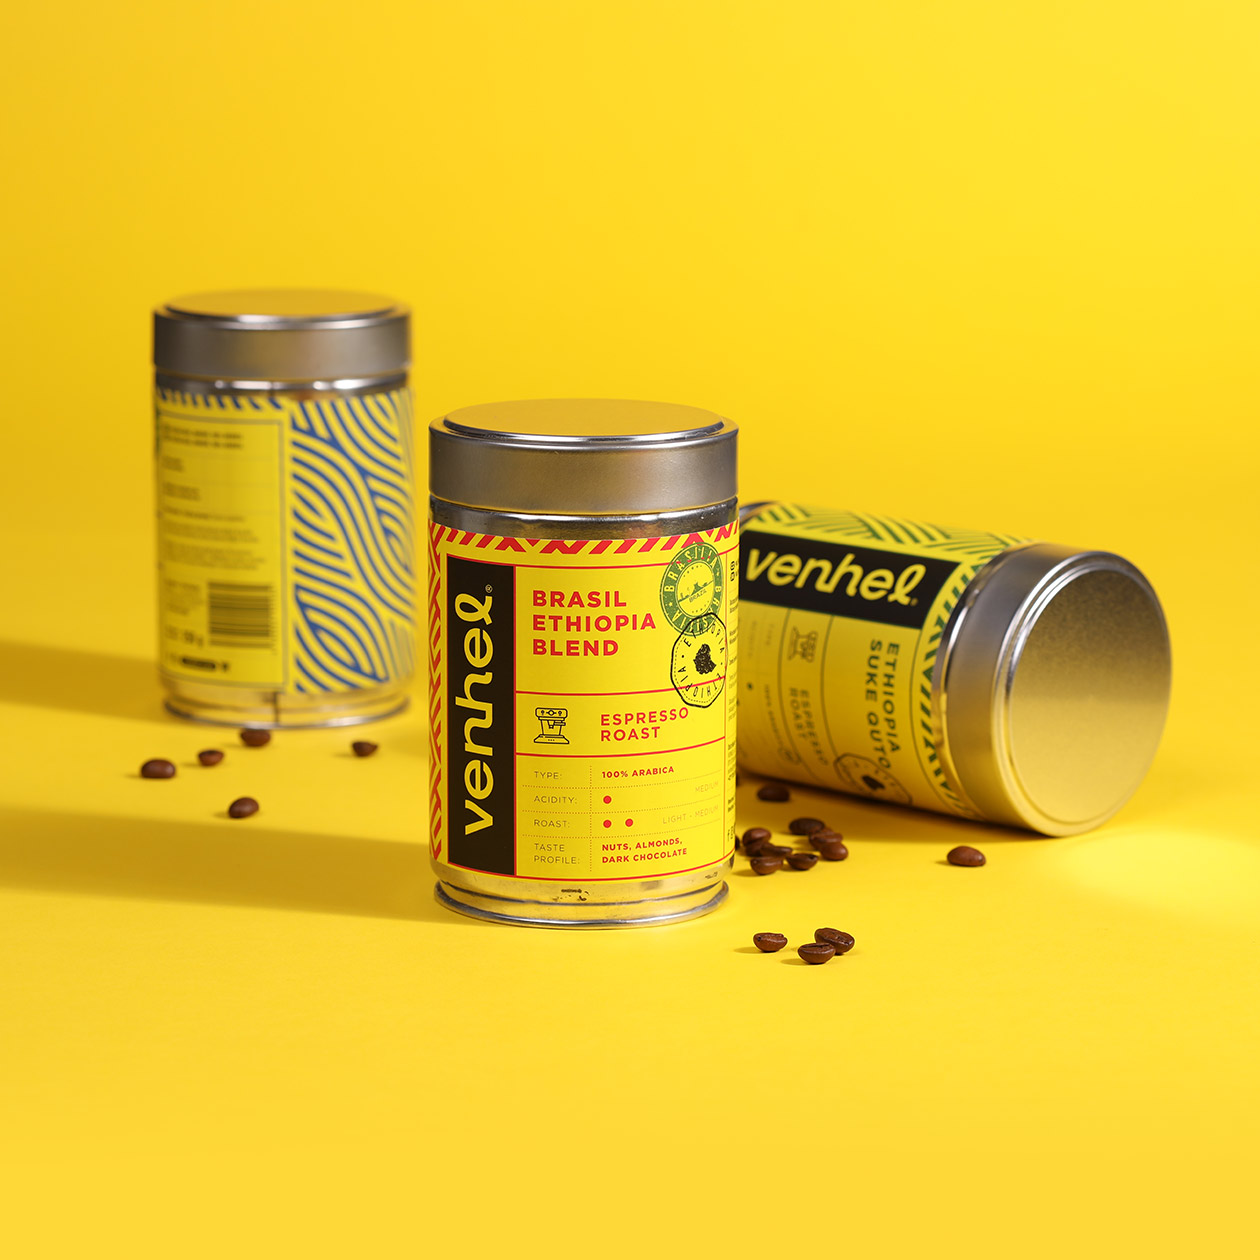 packaging venhel coffee yellow can